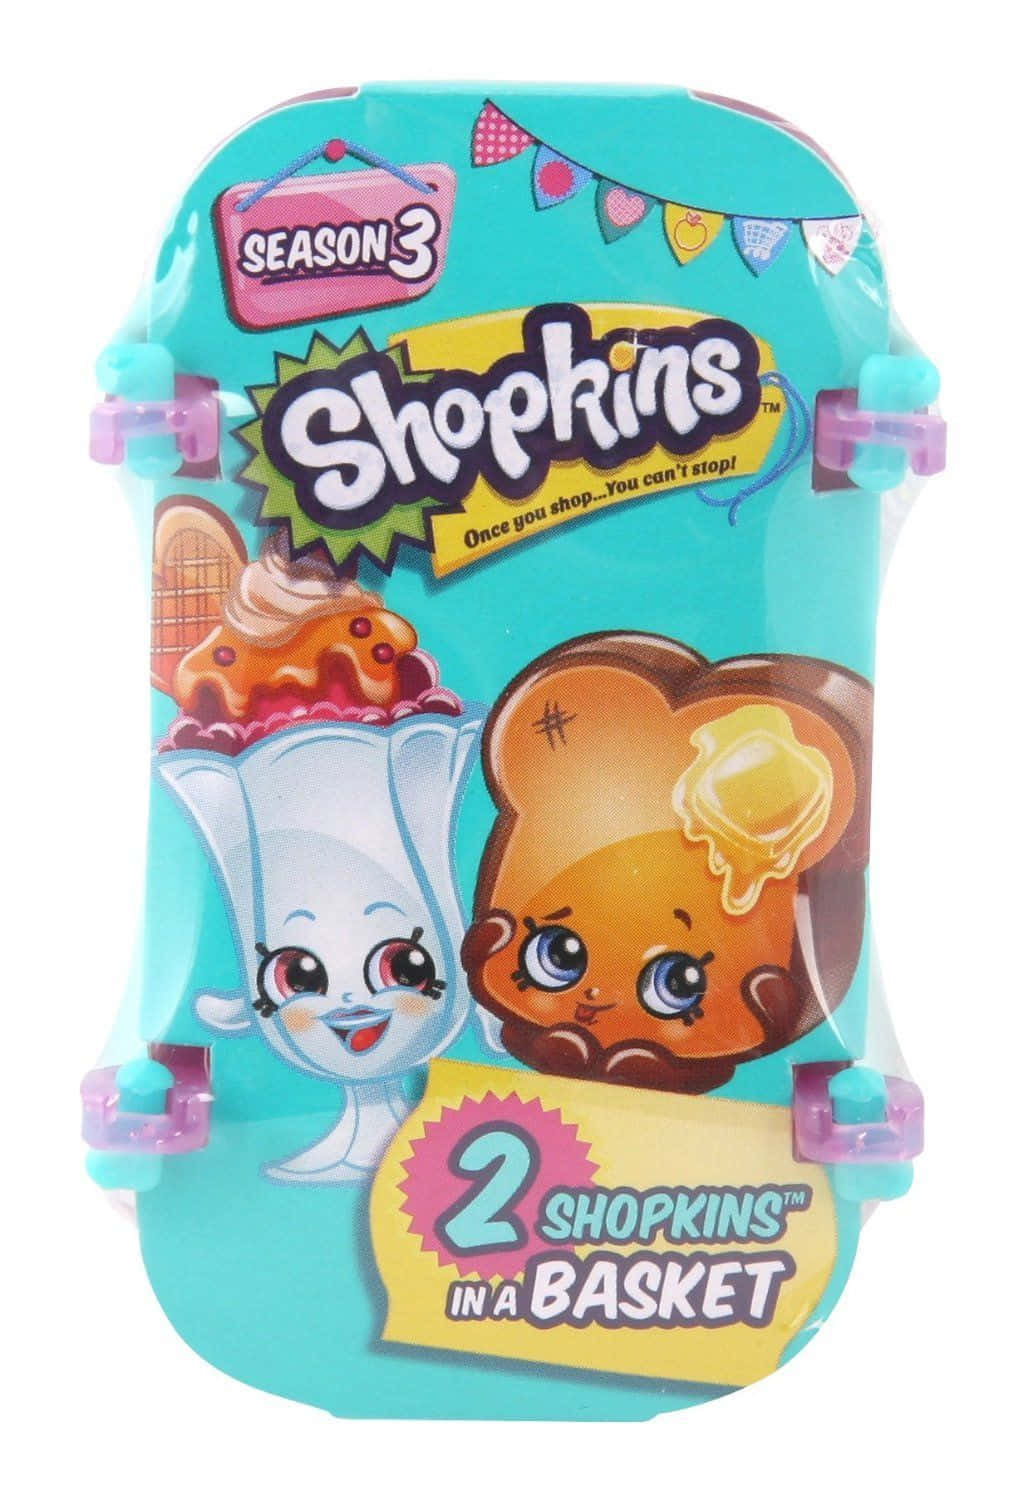 Delightful Collection of Shopkins Characters in One Fun Picture